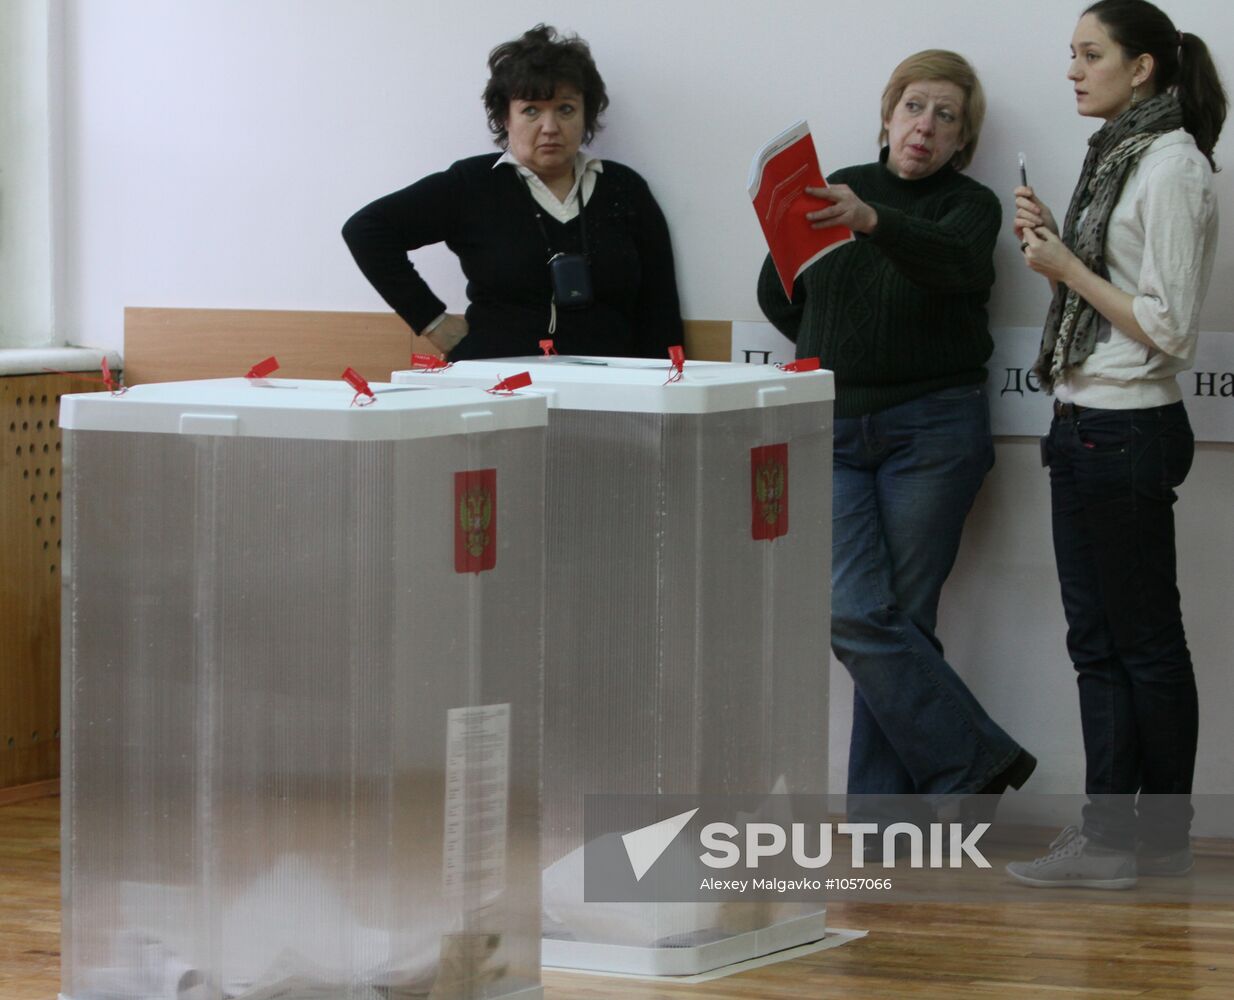 Moscow votes in Russian presidential election